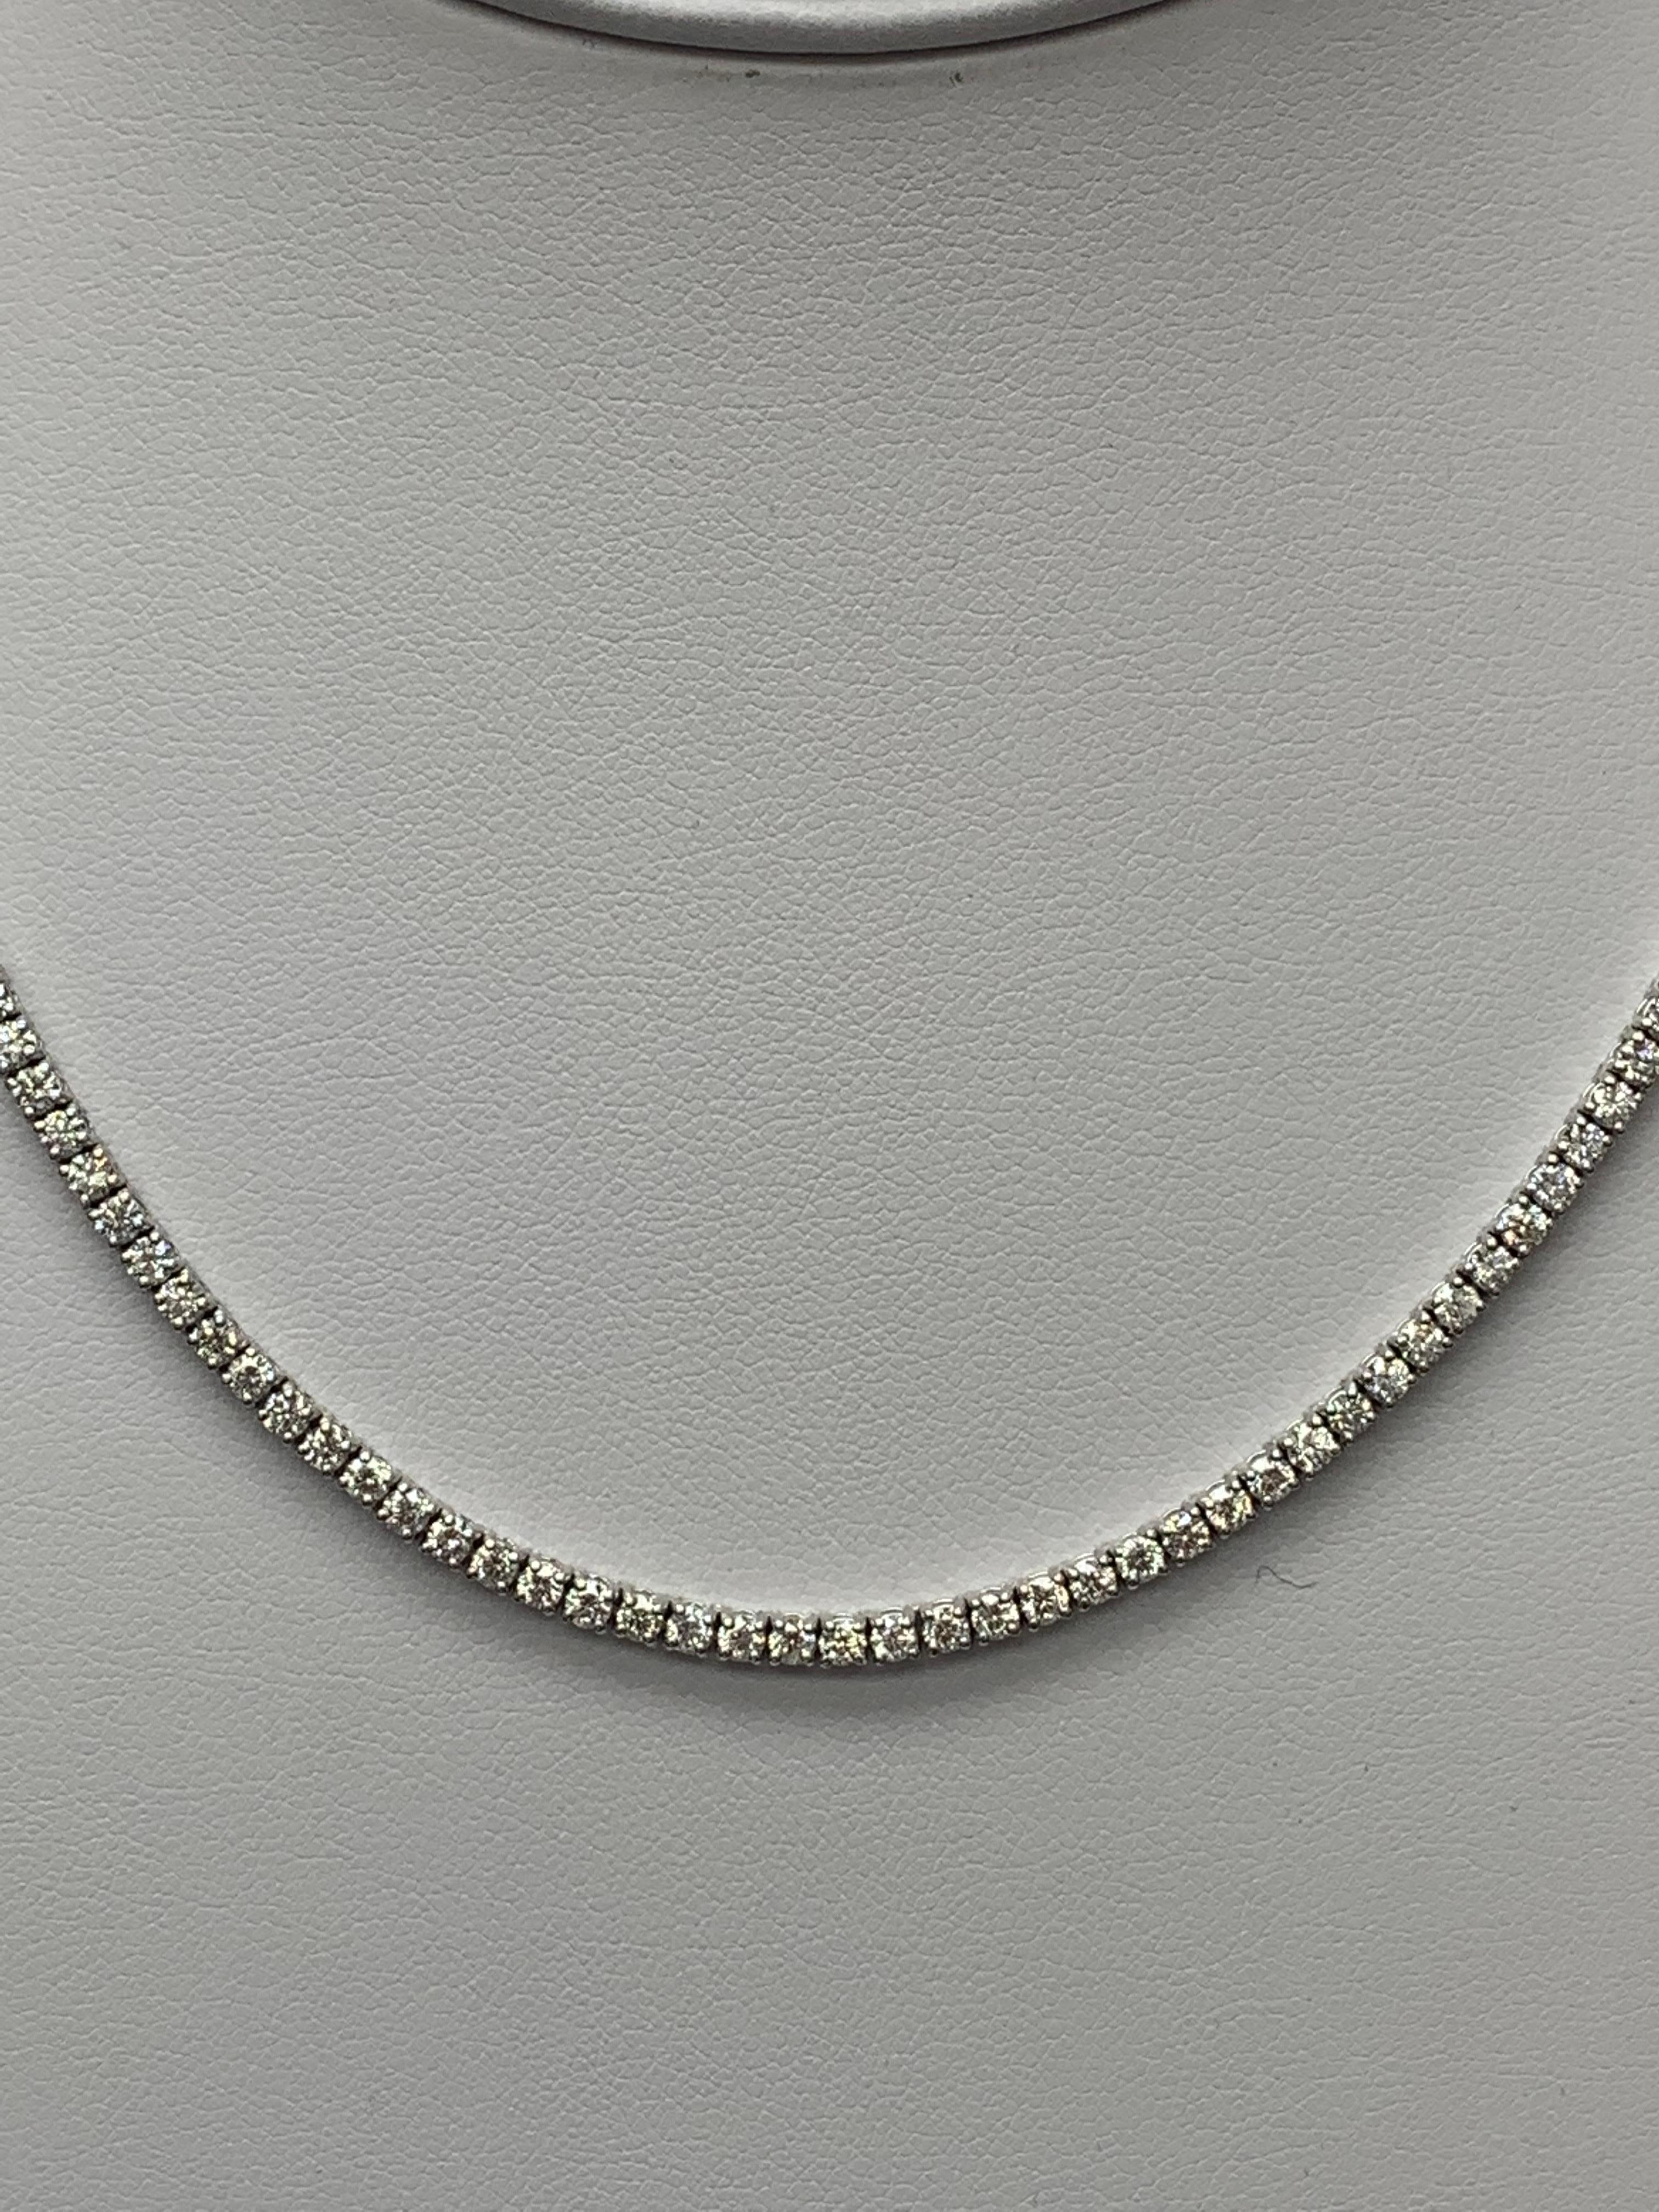 A brilliant and classic piece showcasing a line of round diamonds set in 14K White Gold. 156 diamonds in this necklace are brilliant round cut and weigh 11.31 carats in total. 16 inches in length.